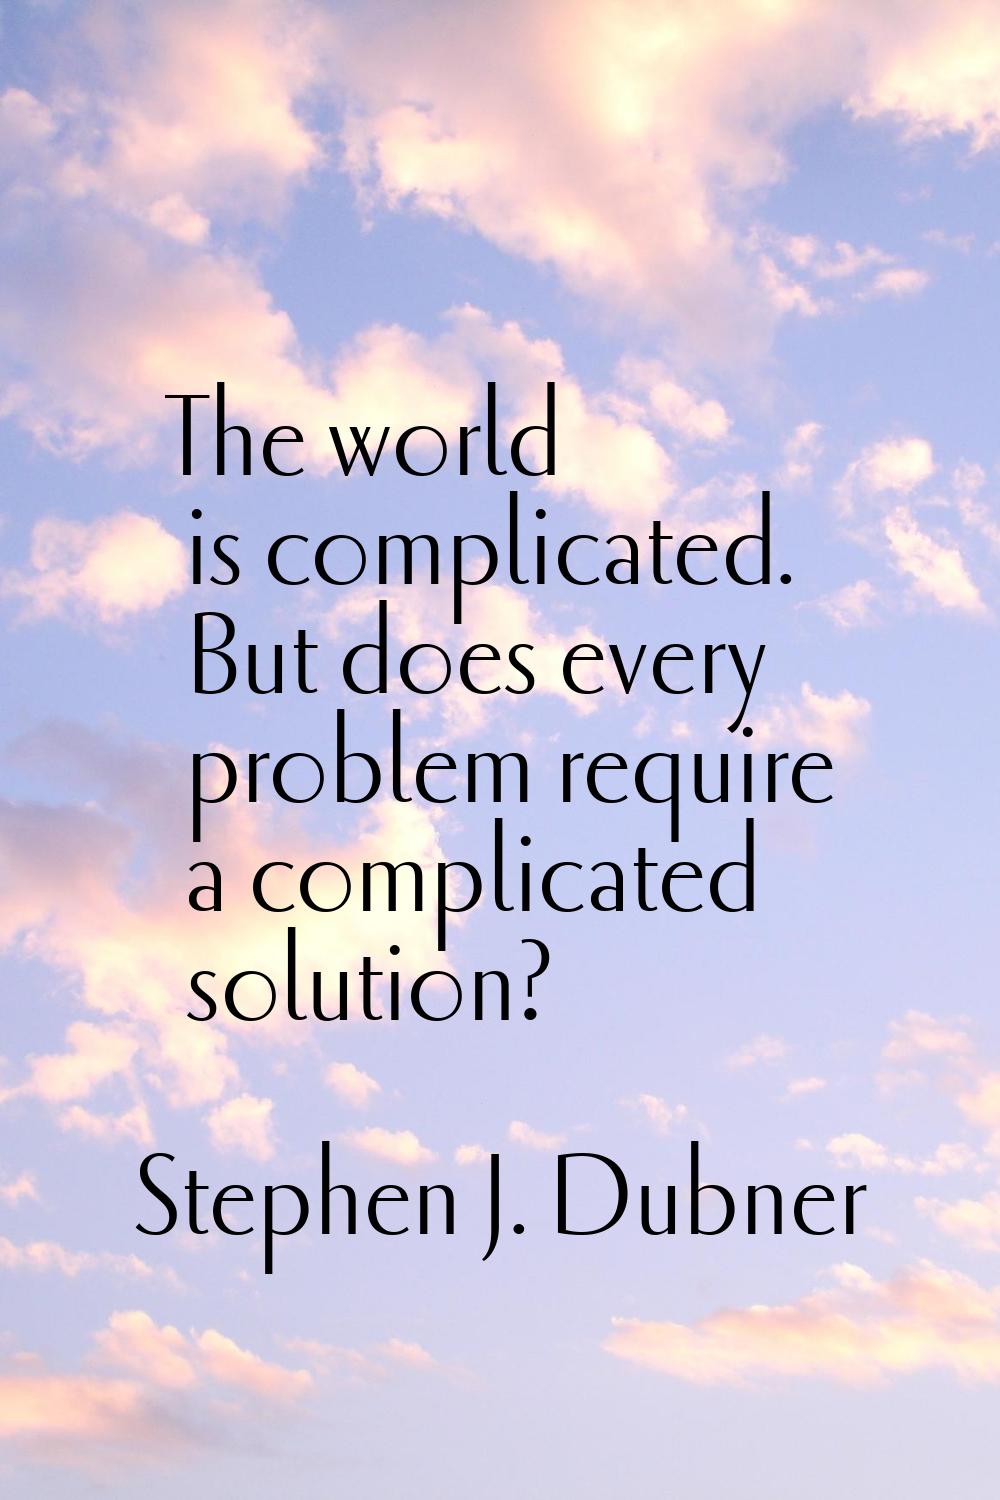 The world is complicated. But does every problem require a complicated solution?